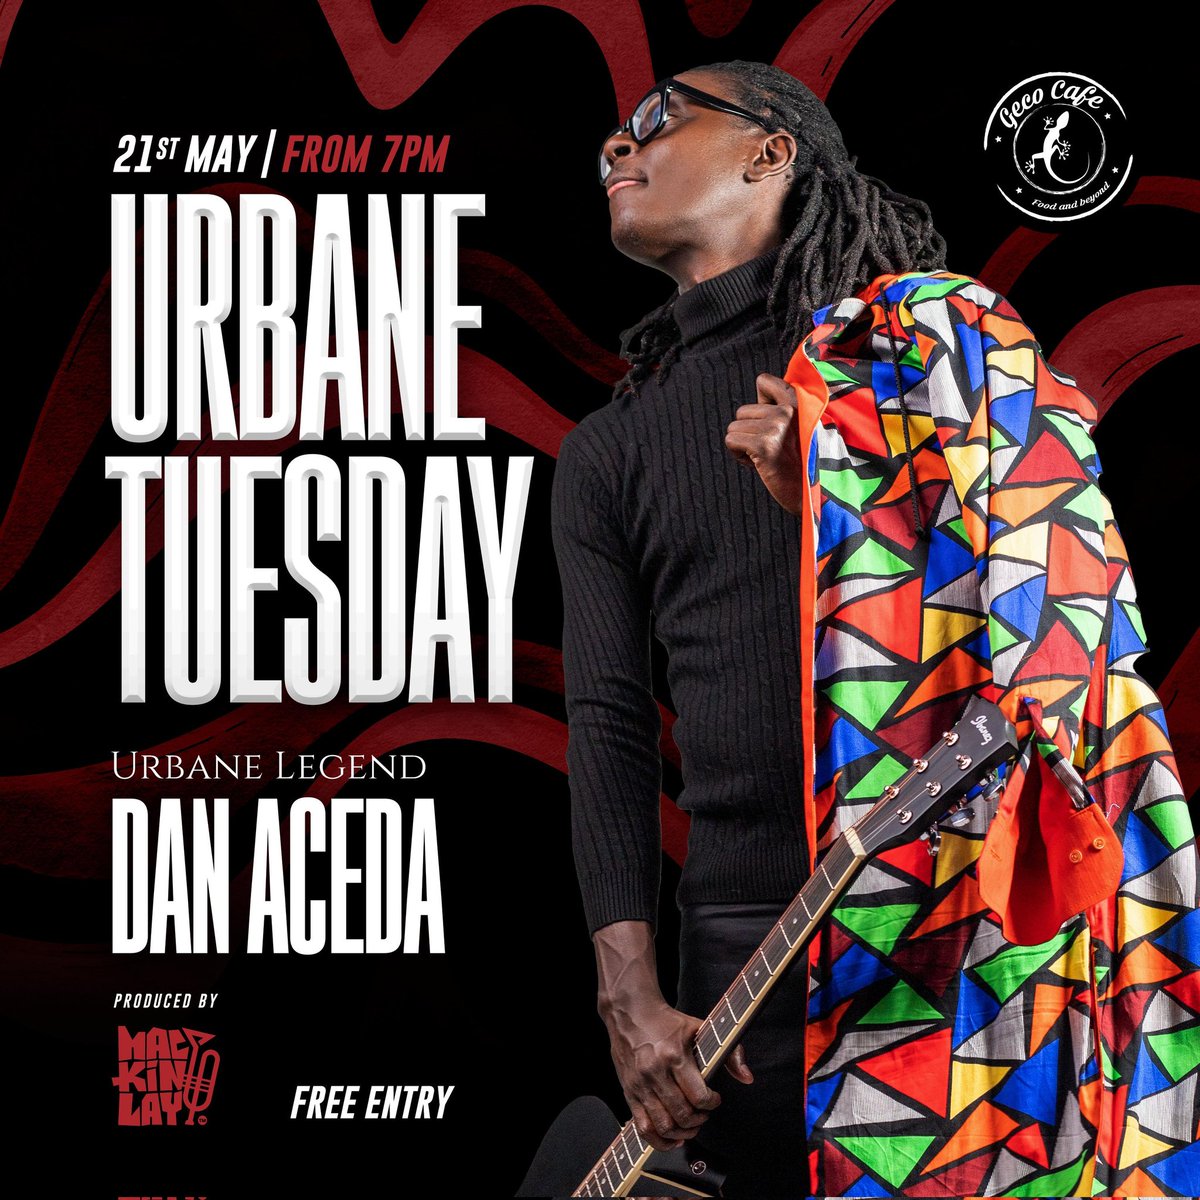 One thing about Benga is when it hits you it takes away the pain. 

@Mackinlay_Music x @danaceda 

Save the date! Tell a friend! 

Tuesday 21st at Geco